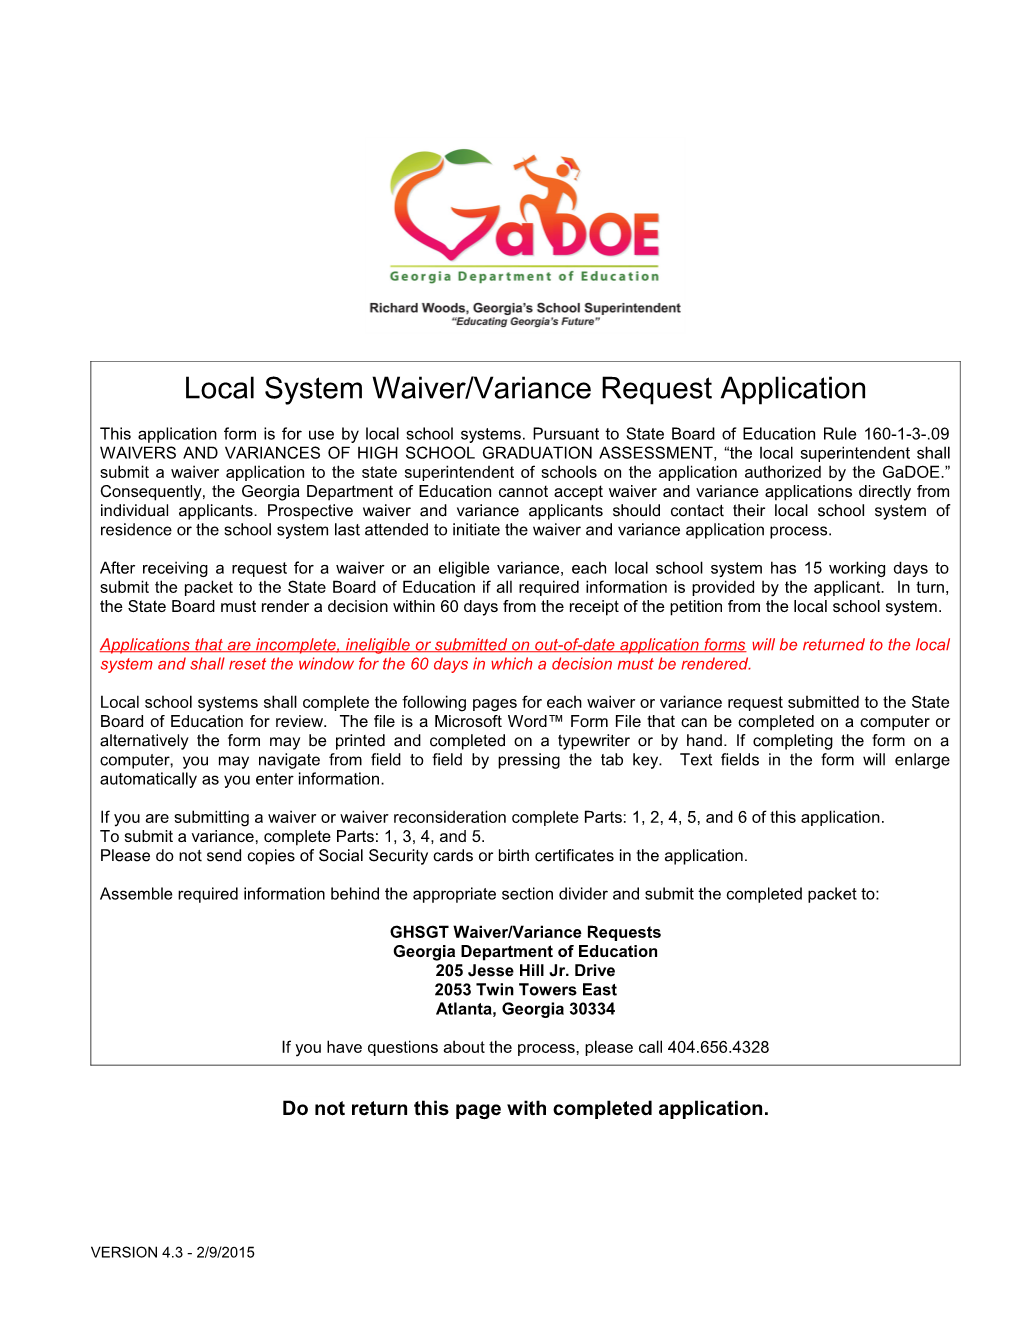 Local System Waiver/Variance Request Application